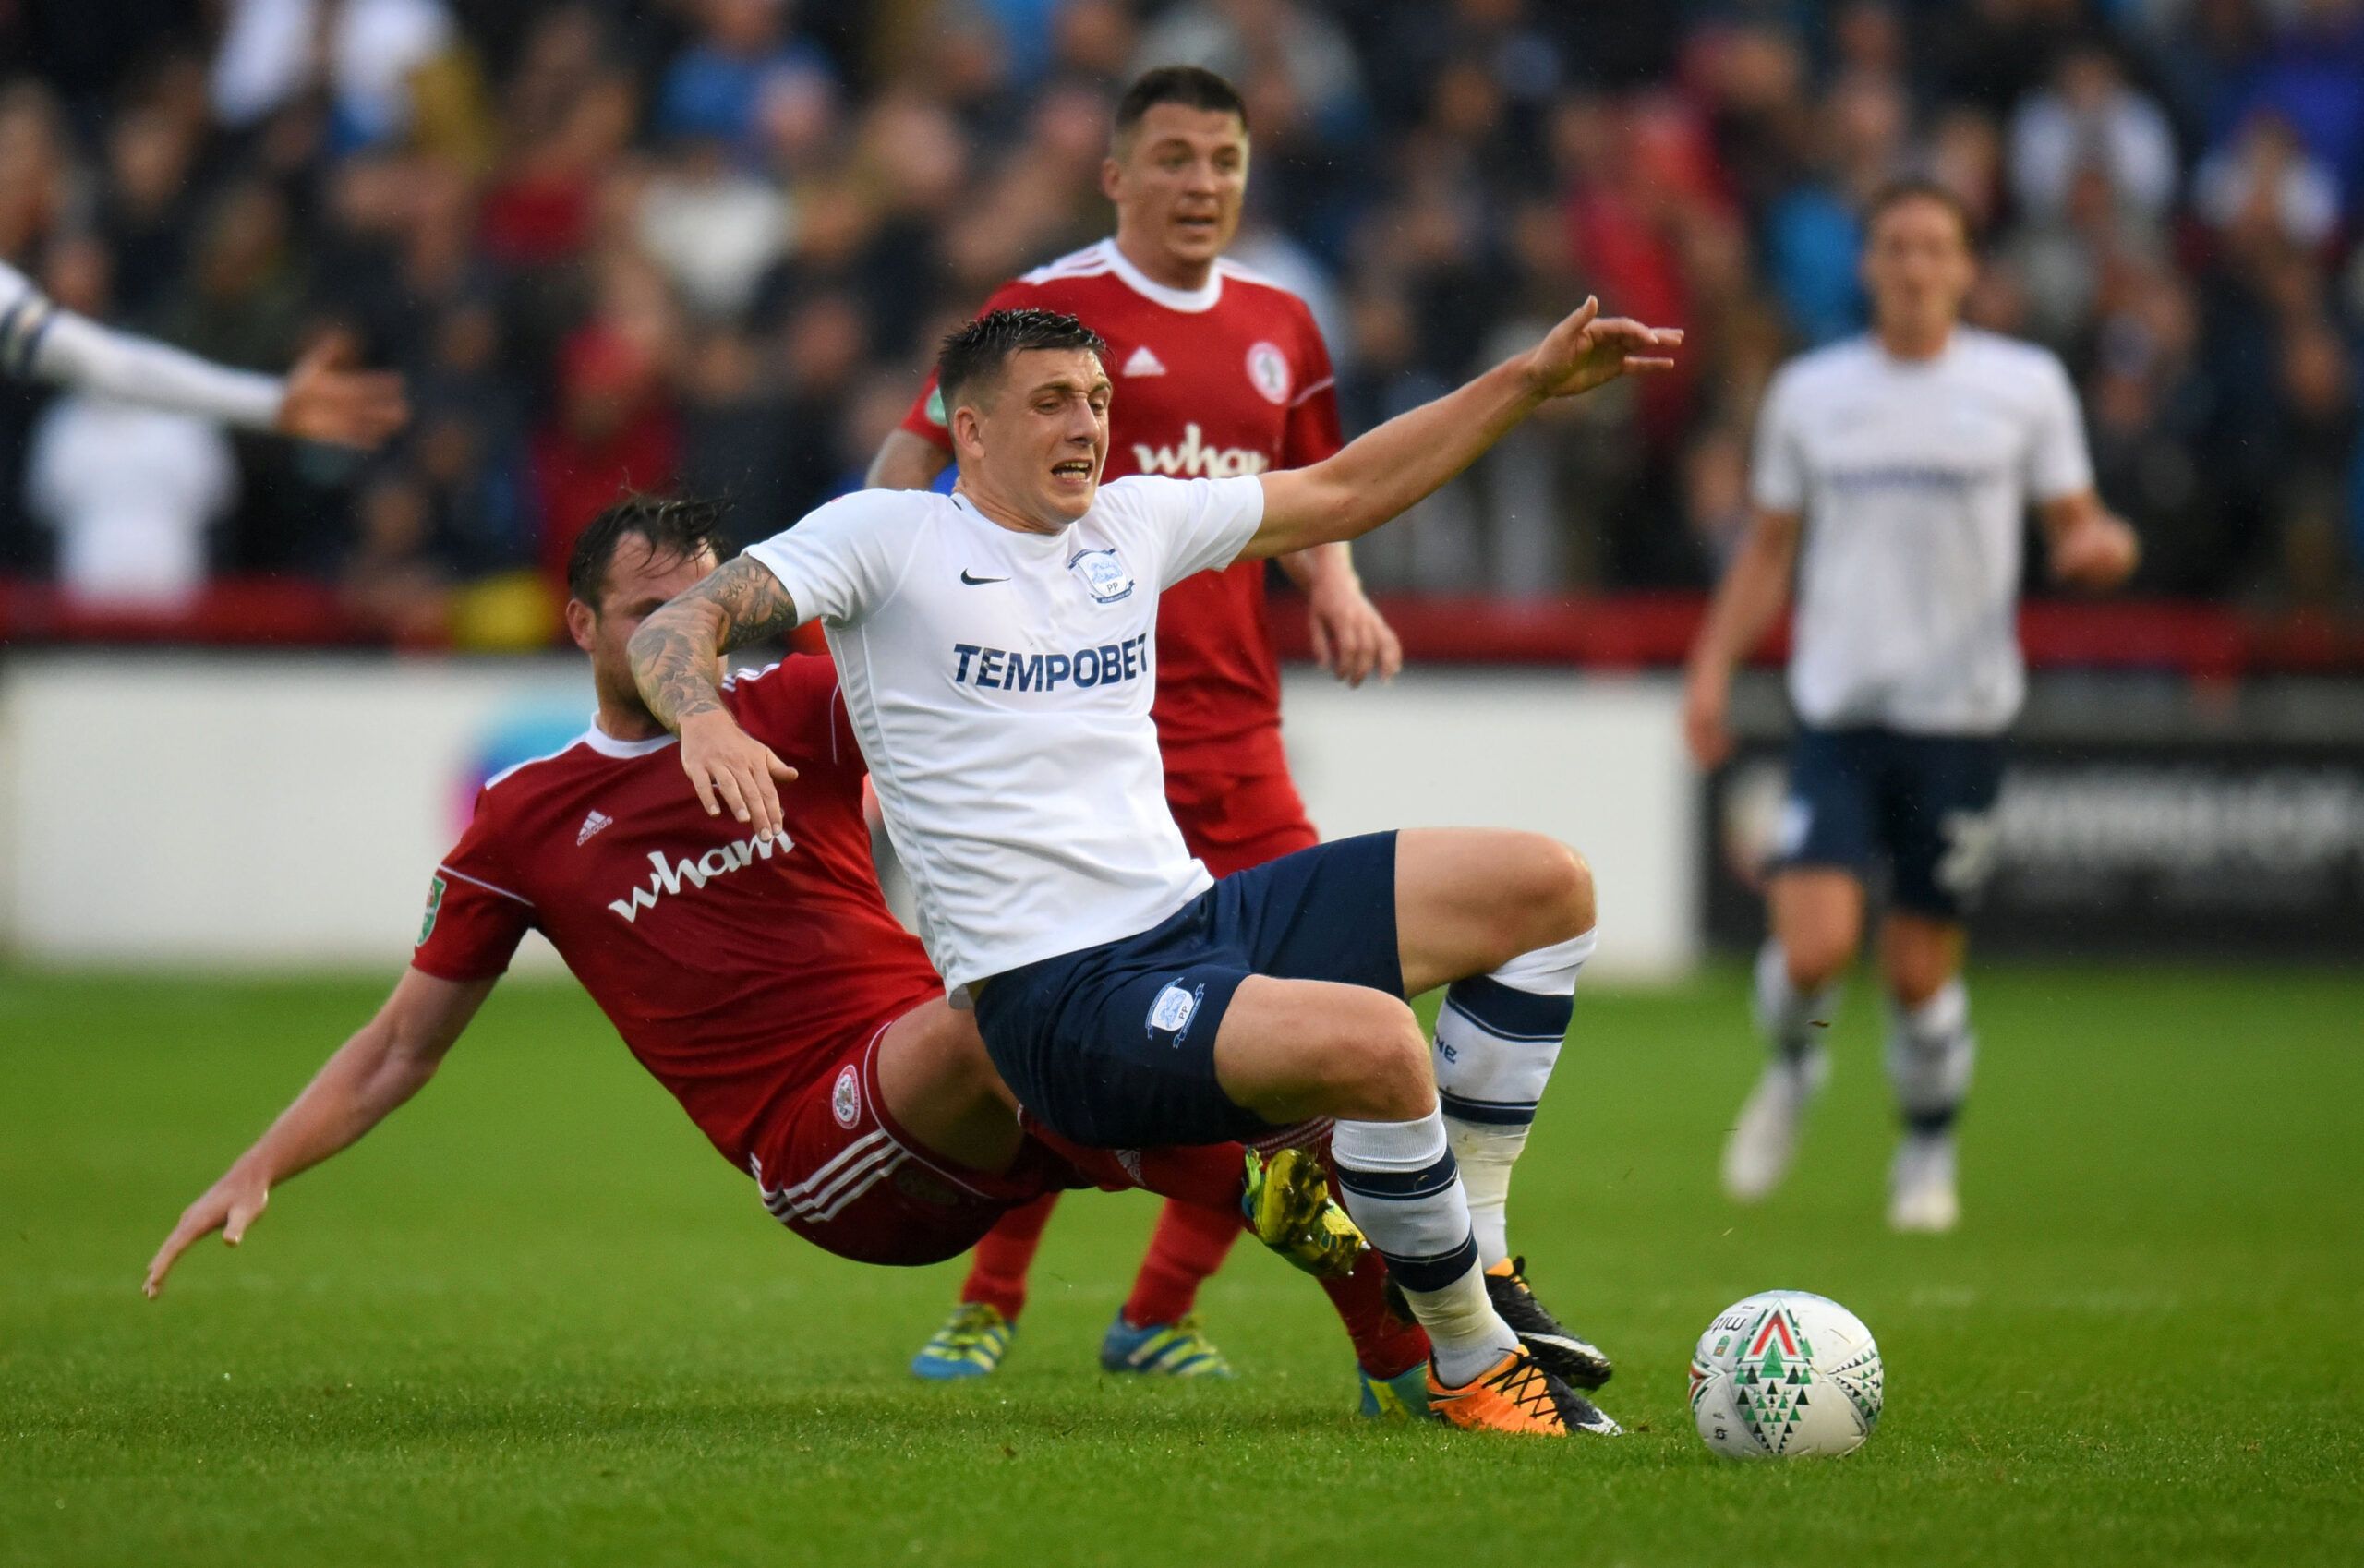 Soccer Football - Carabao Cup First Round - Accrington Stanley vs Preston North End - Accrington, Britain - August 8, 2017  Accrington Stanley's Mark Hughes in action with Preston North End's Jordan Hugill   Action Images/Paul Burrows